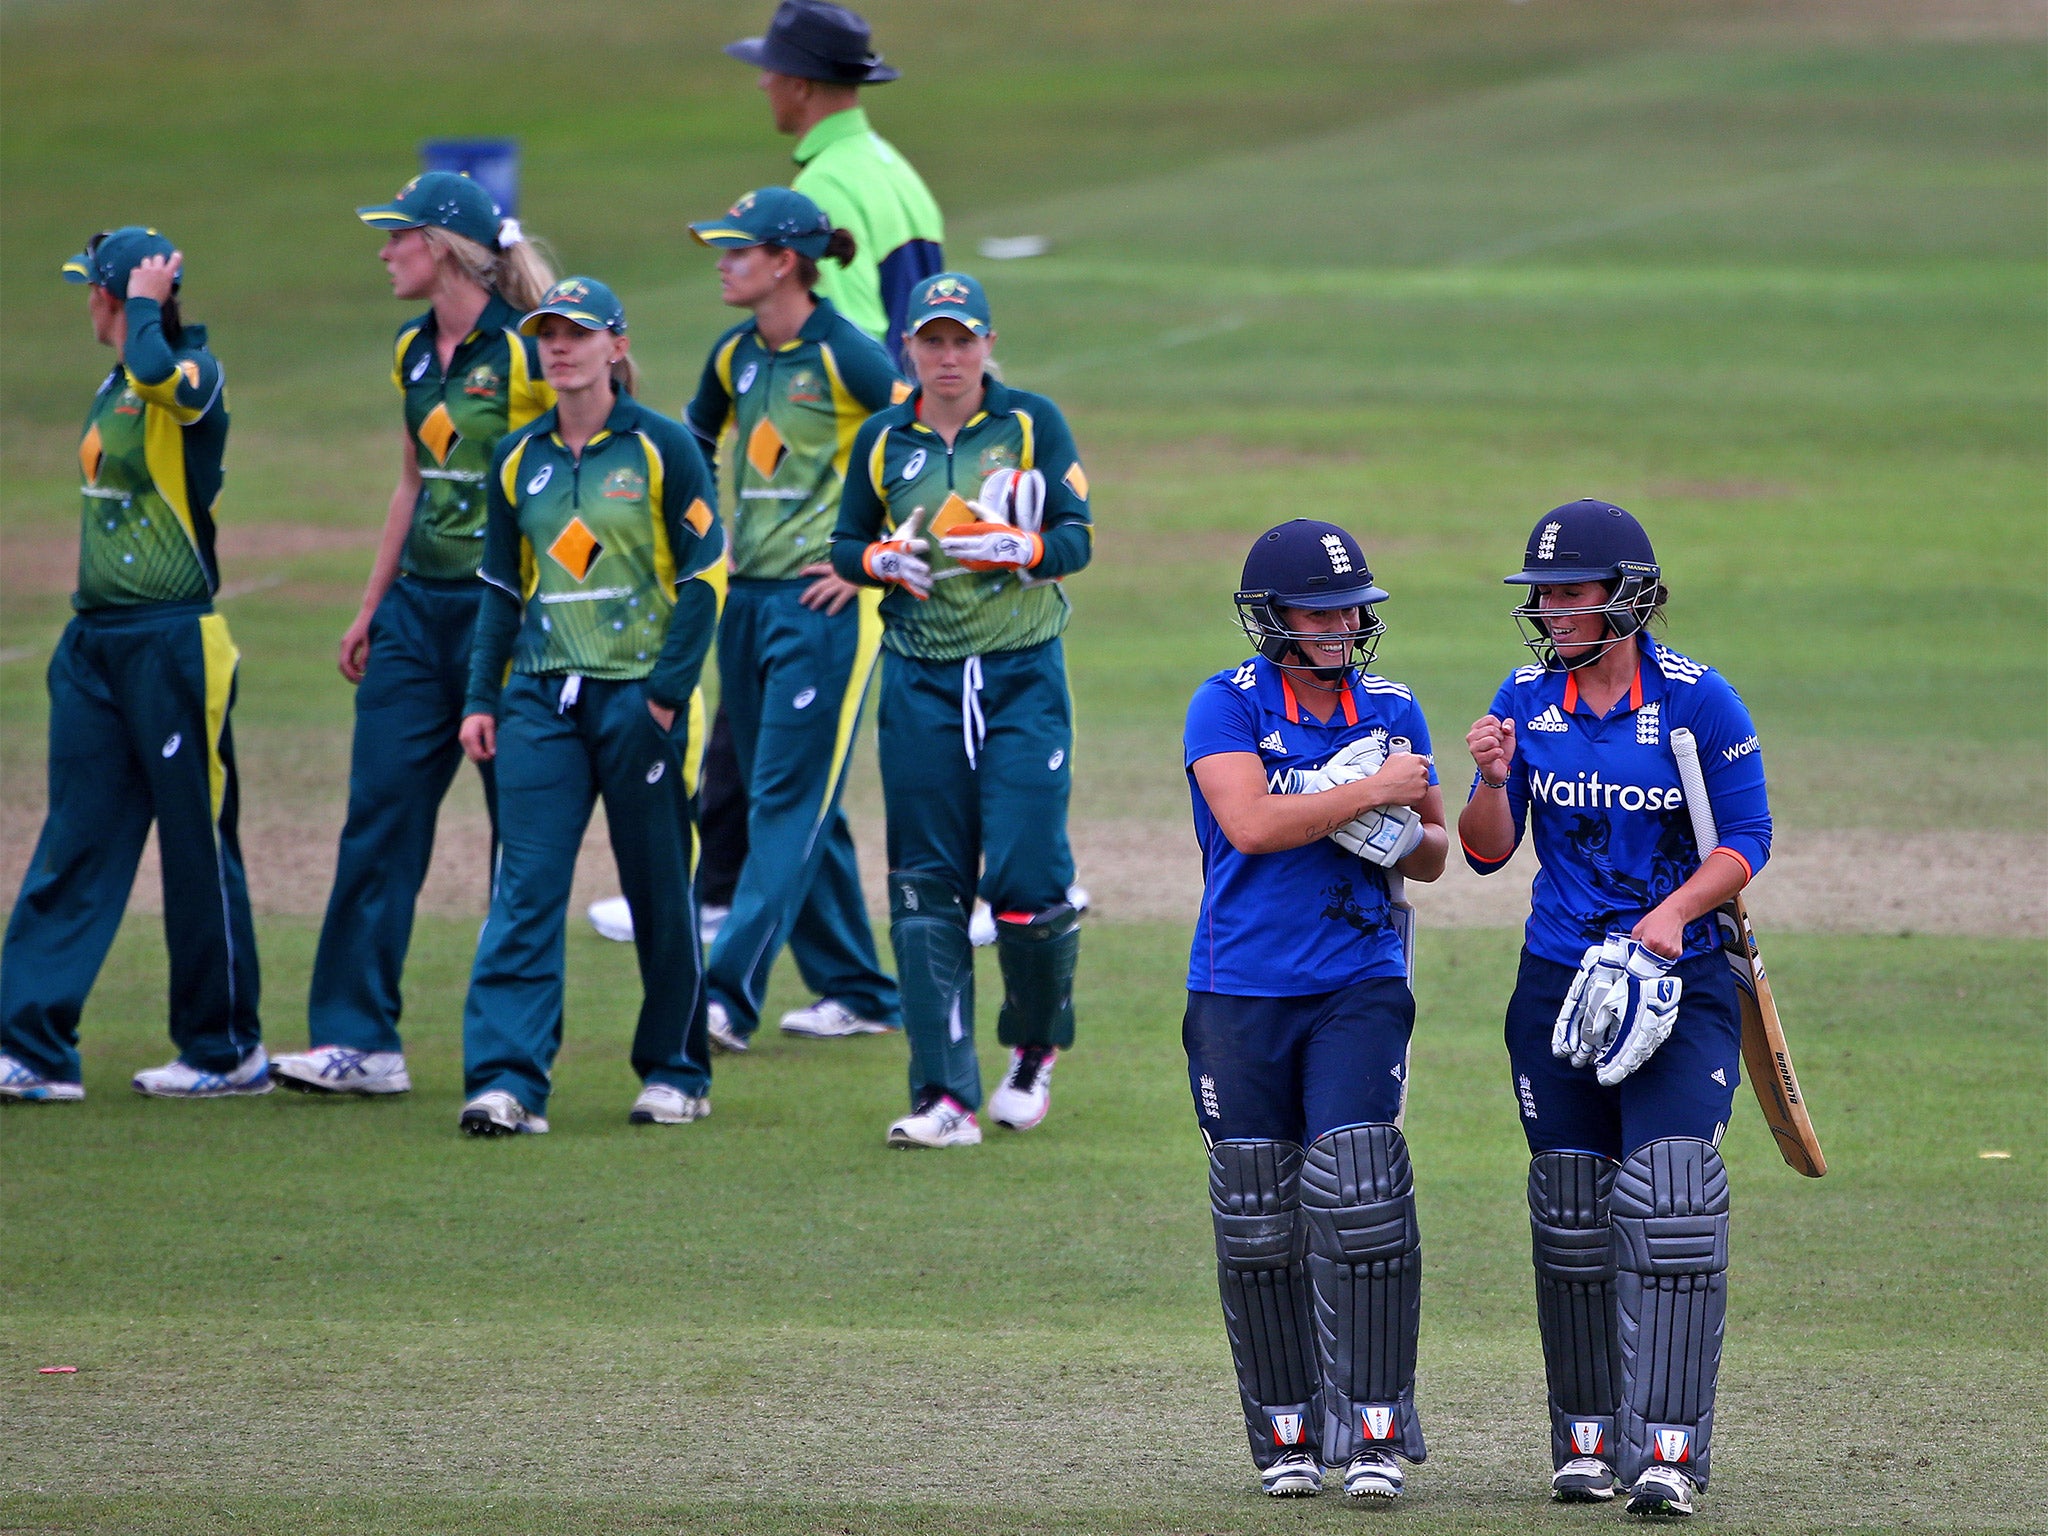 Georgia Elwiss and Katherine Brunt perform a celebratory fist-bump after steering England to victory in the first Ashes match at Taunton